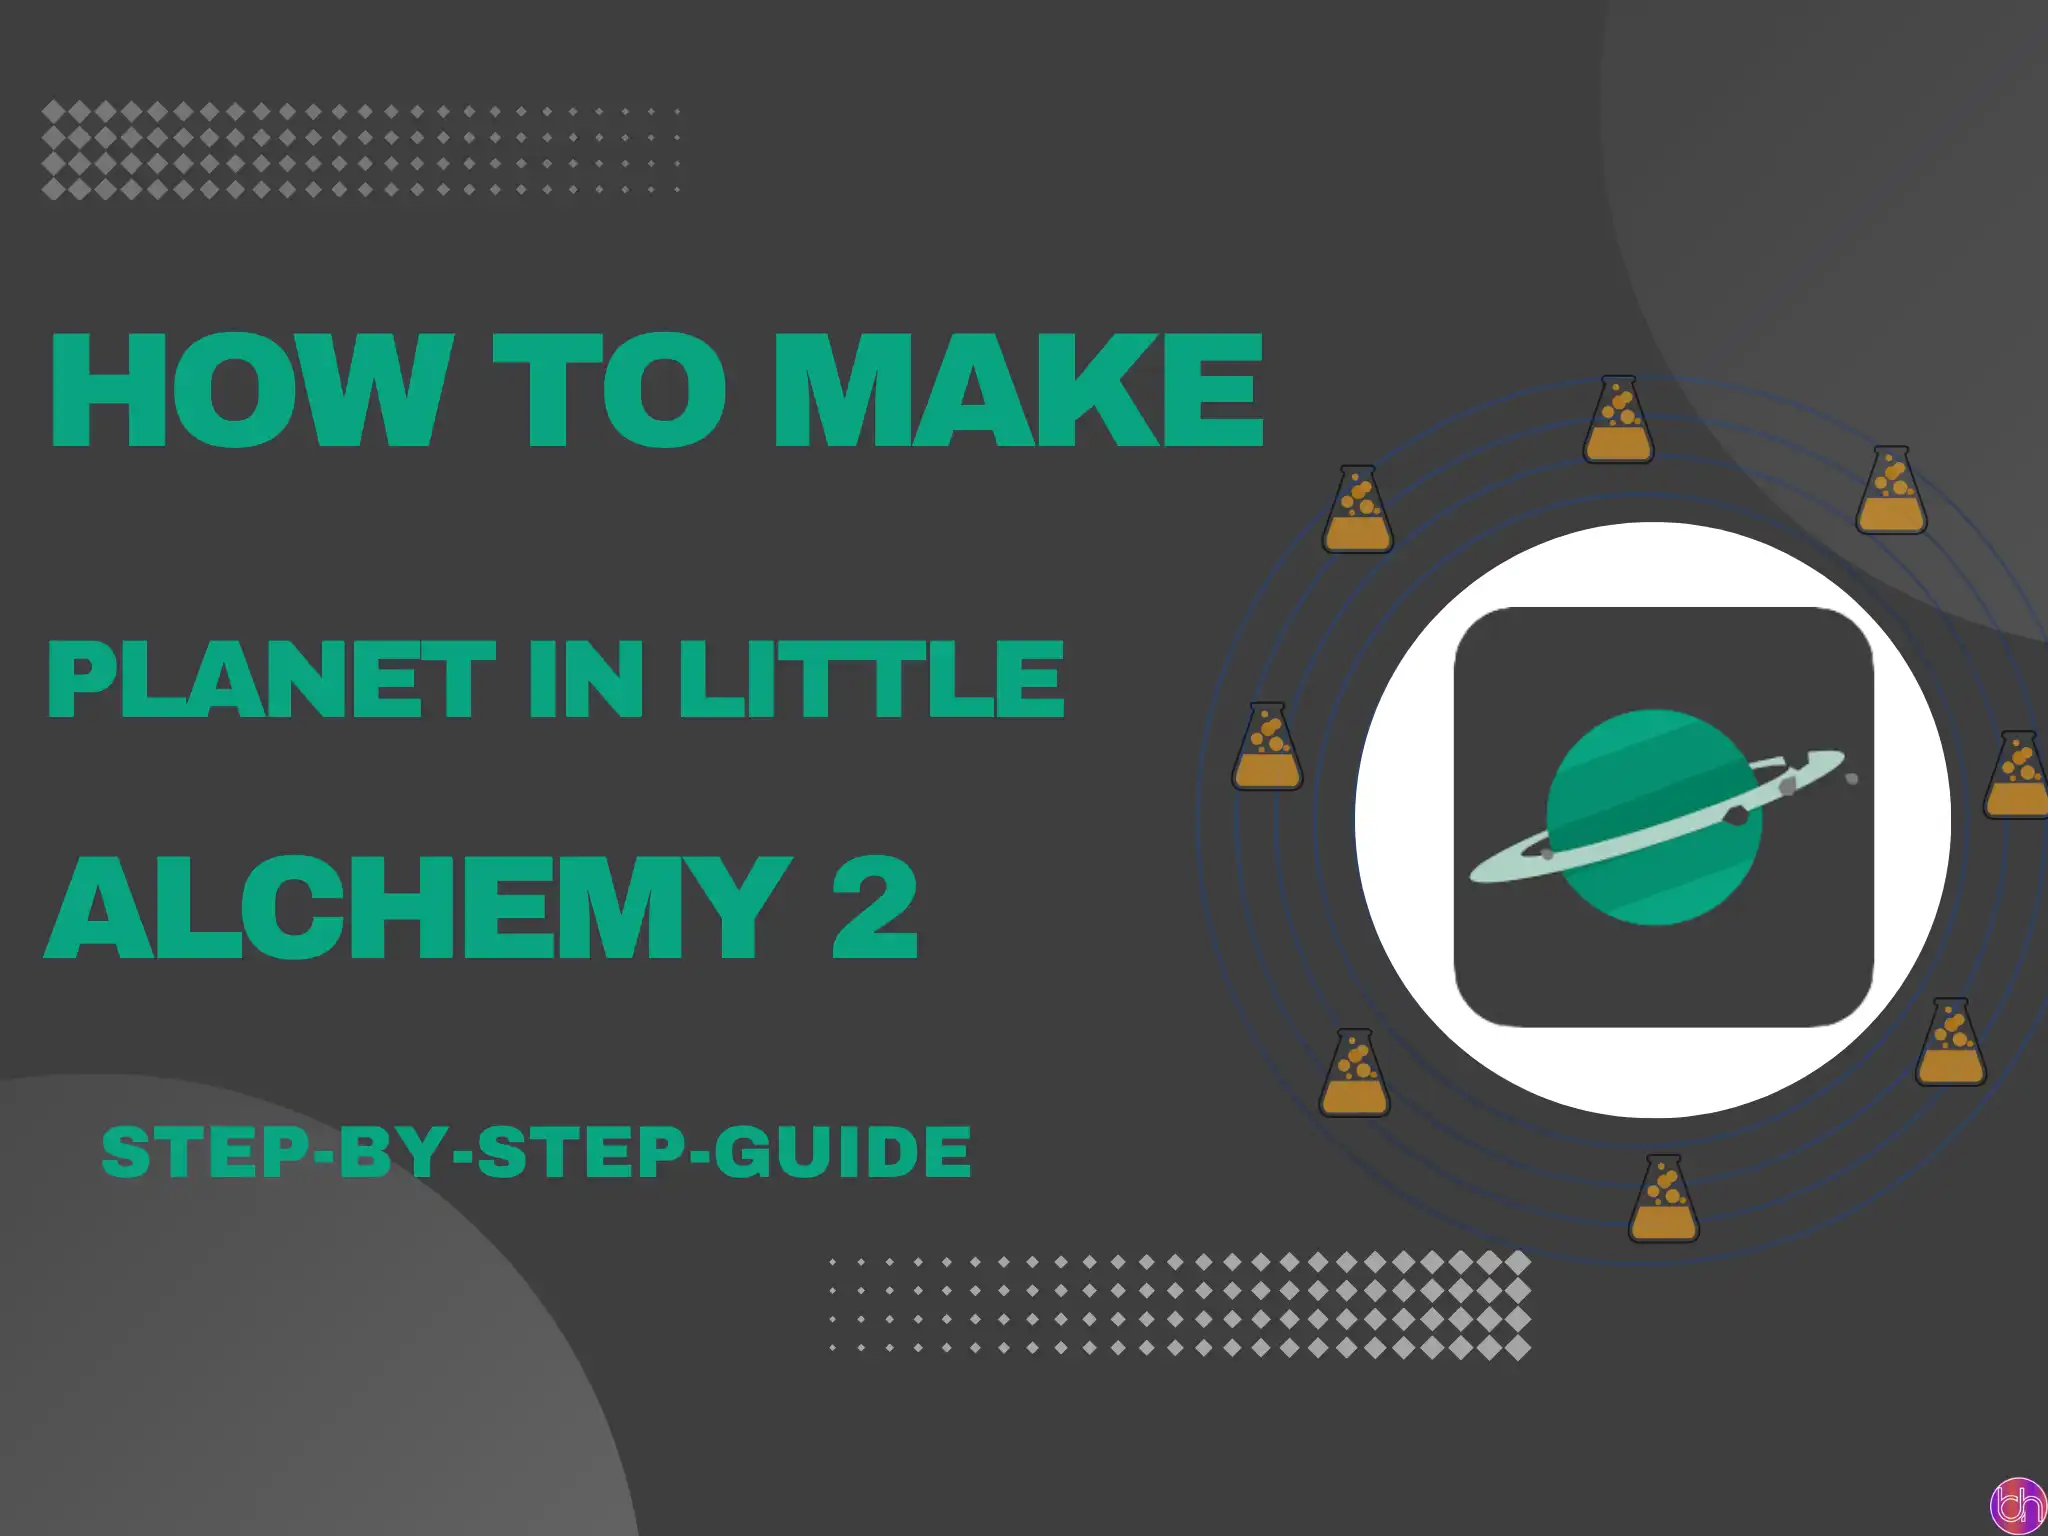 How to make Planet in little alchemy 2